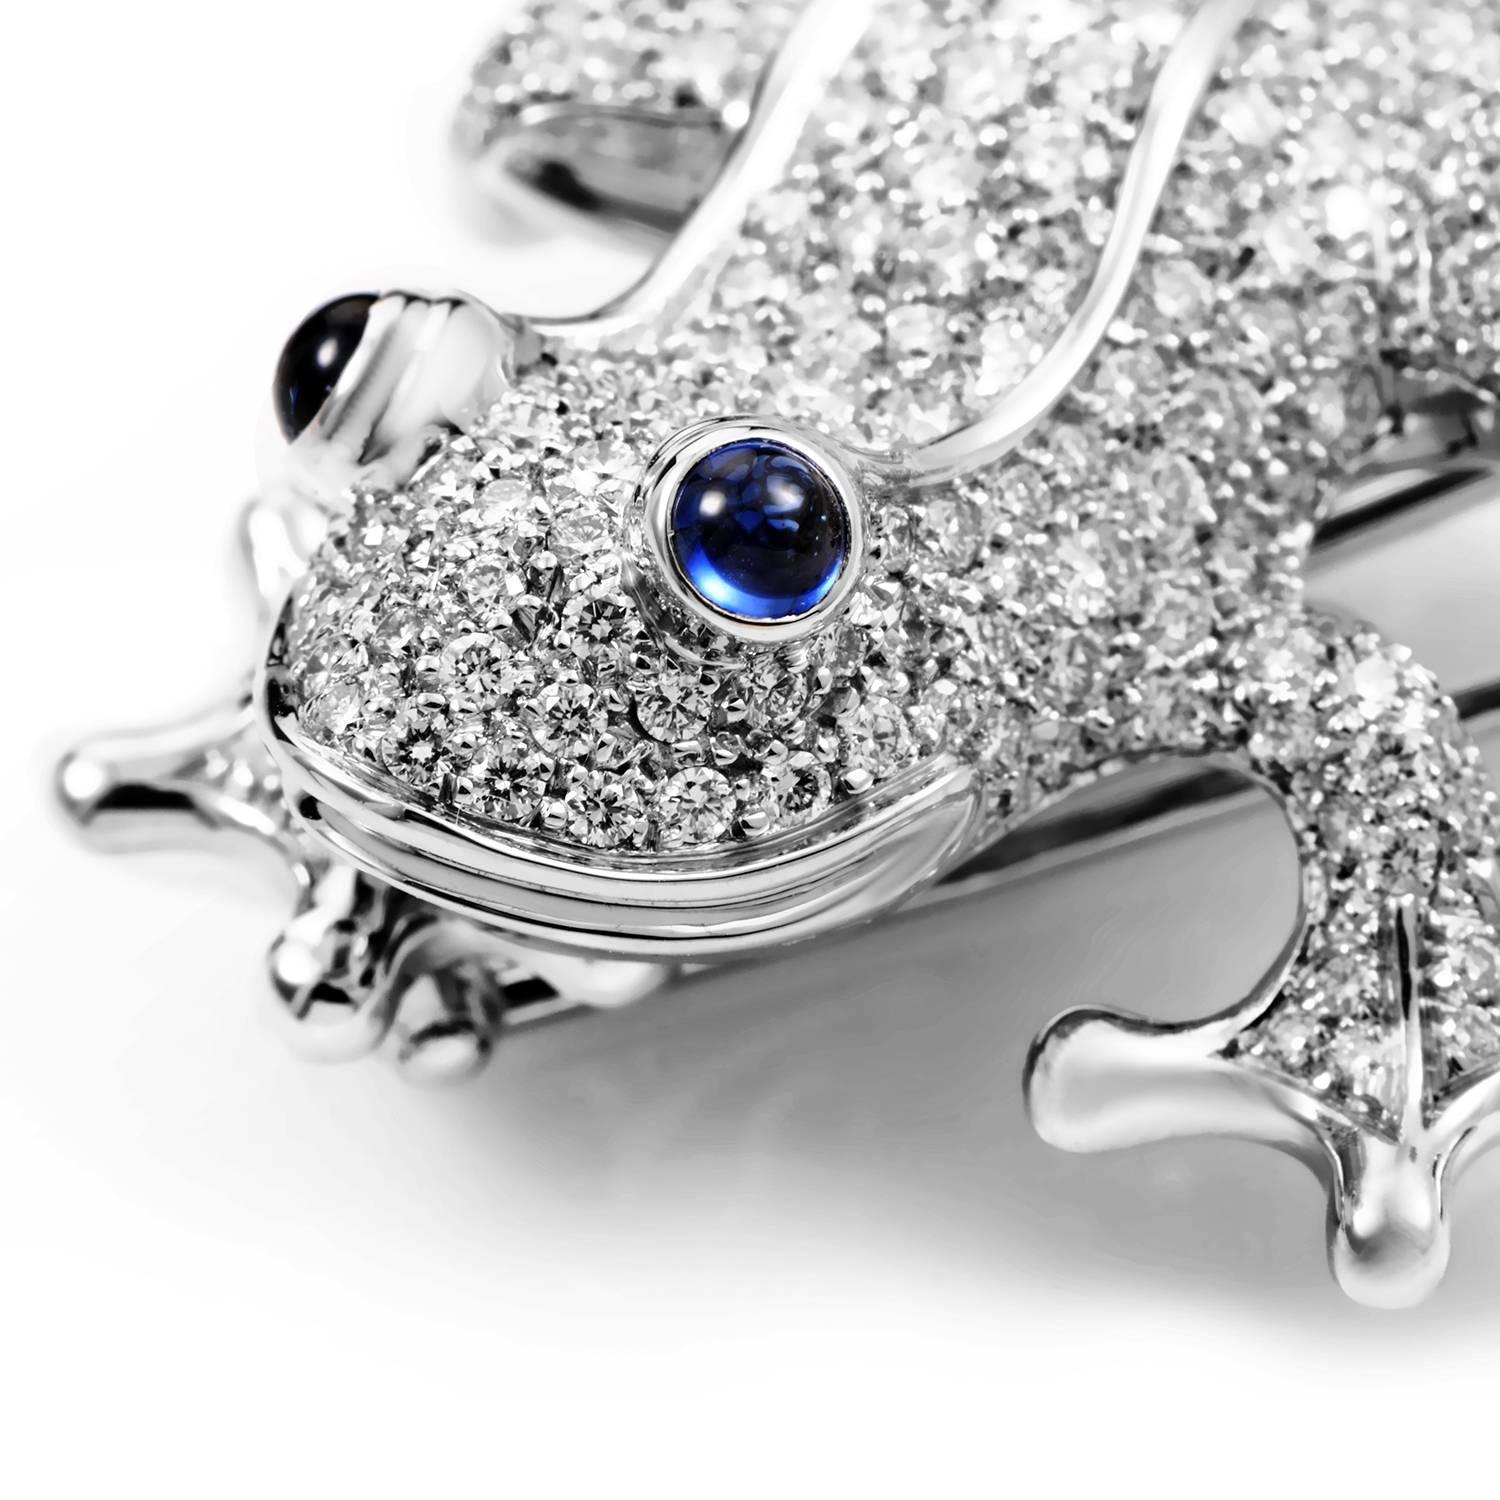 Made of prestigious 18K white gold with splendid design in shape of a frog, this offbeat Chanel brooch is attractive and stylish. The body of the brooch is paved with approximately 5.00 carats of diamonds while the eyes are set with two magnificent